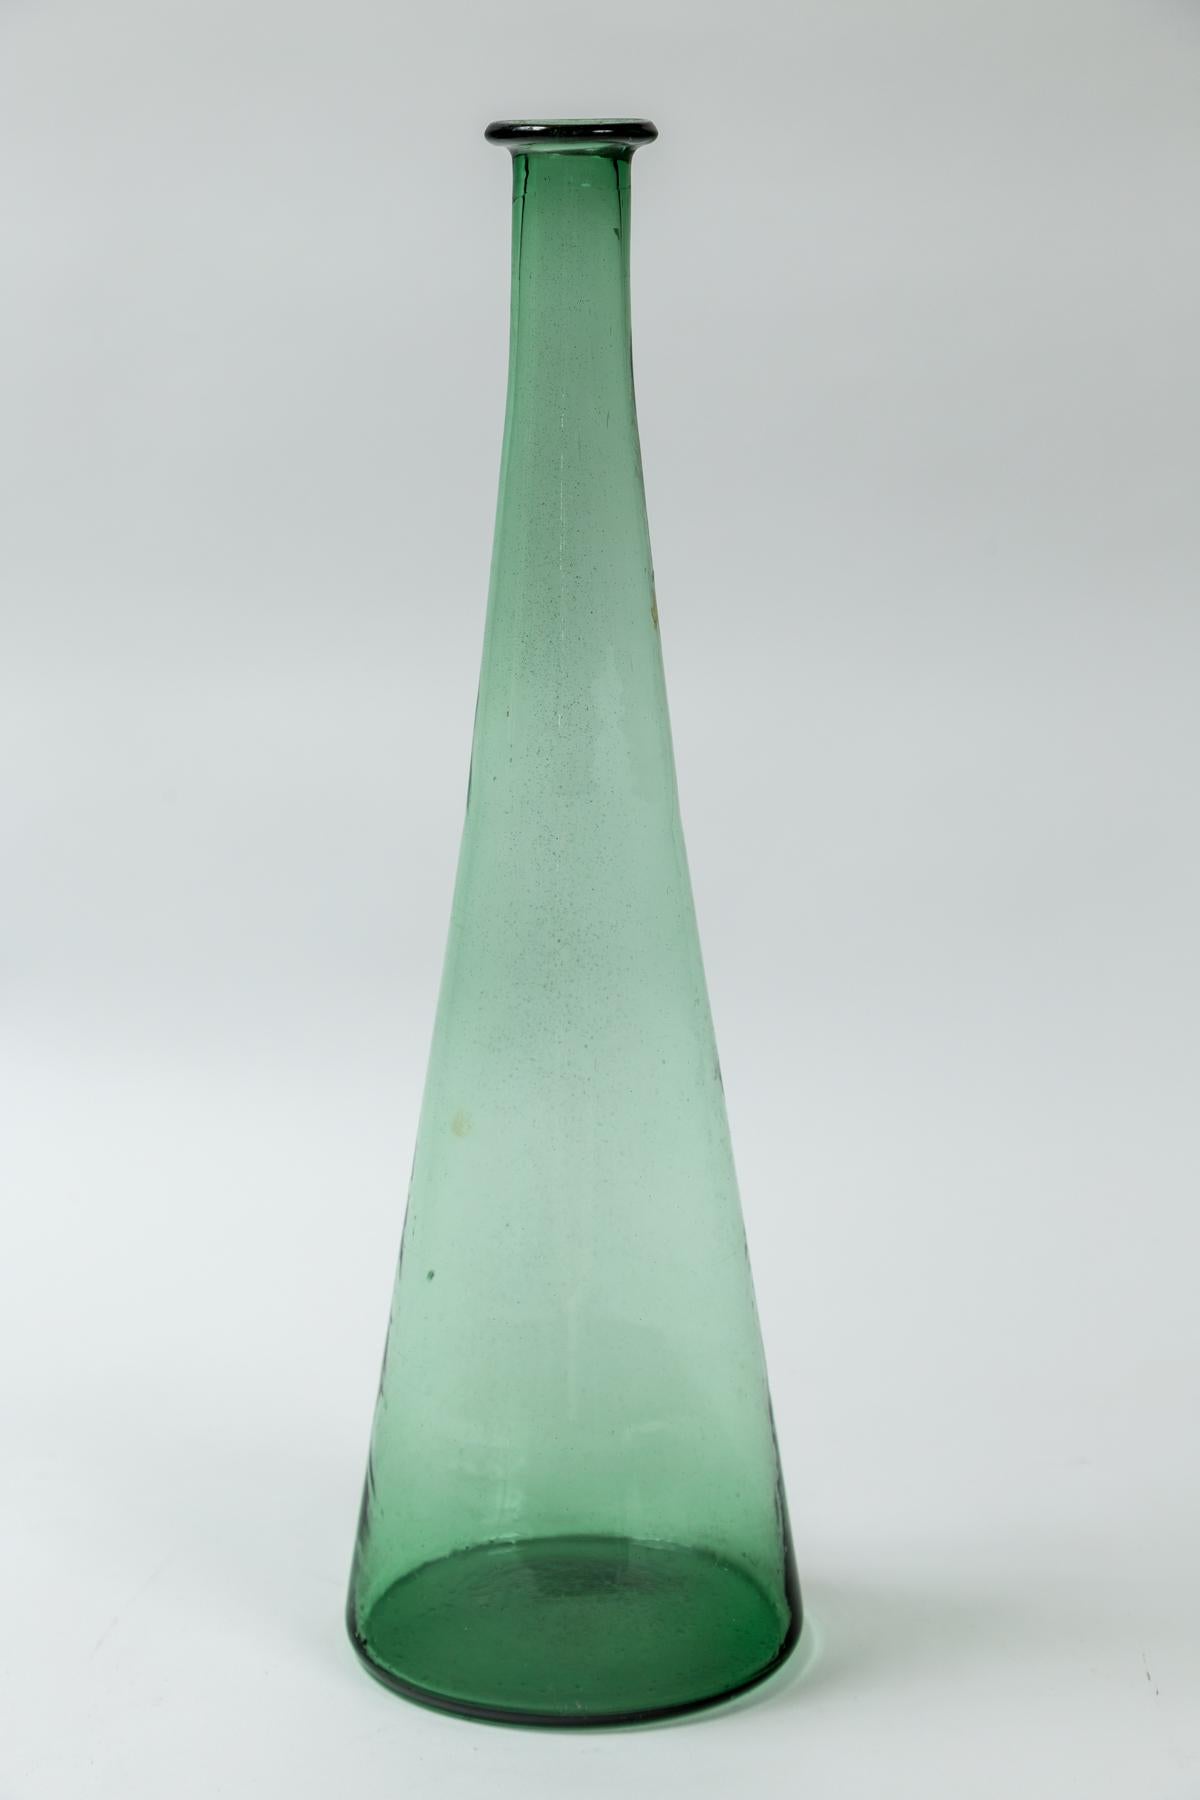 Mid-Century Green Glass Decanter, Empoli, Italy. Tall, tapered glass decanter. Hand-blown glass in the distinctive green color used by Empoli.